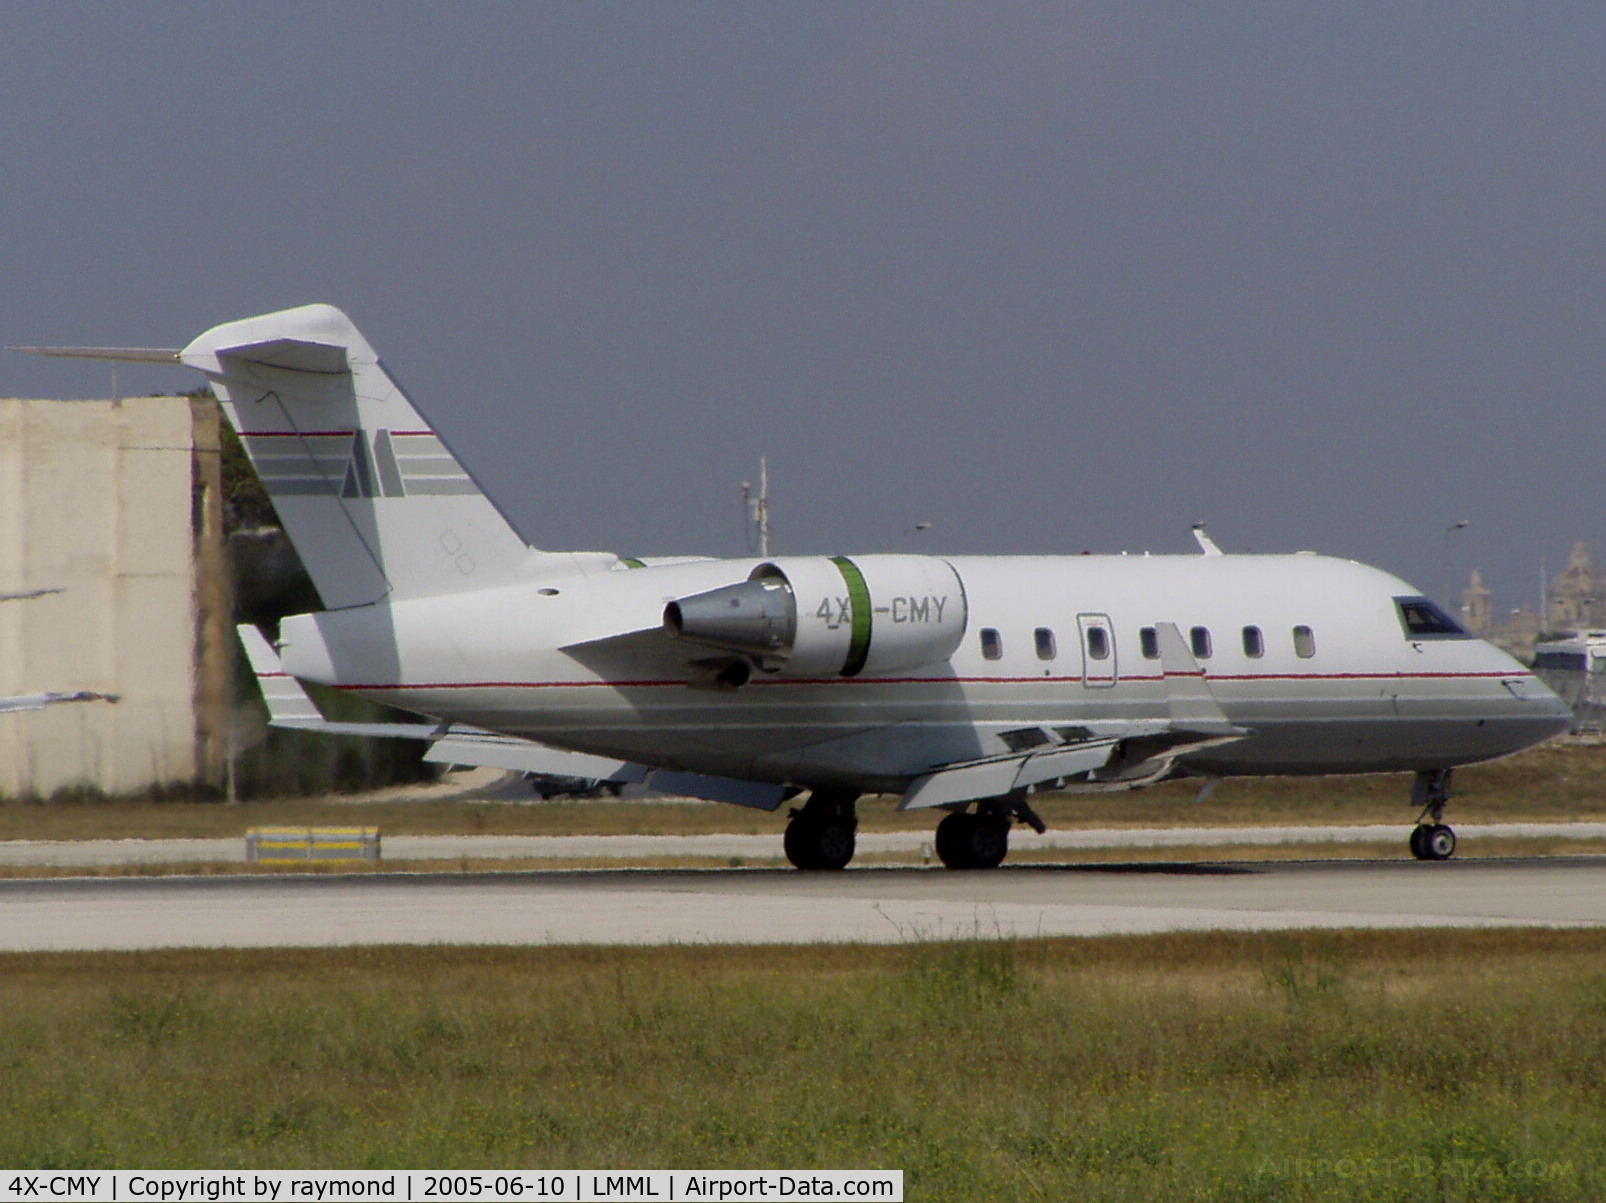 4X-CMY, 1998 Bombardier Challenger 604 (CL-600-2B16) C/N 5388, CL600 Challenger 4X-CMY Noy Aviation